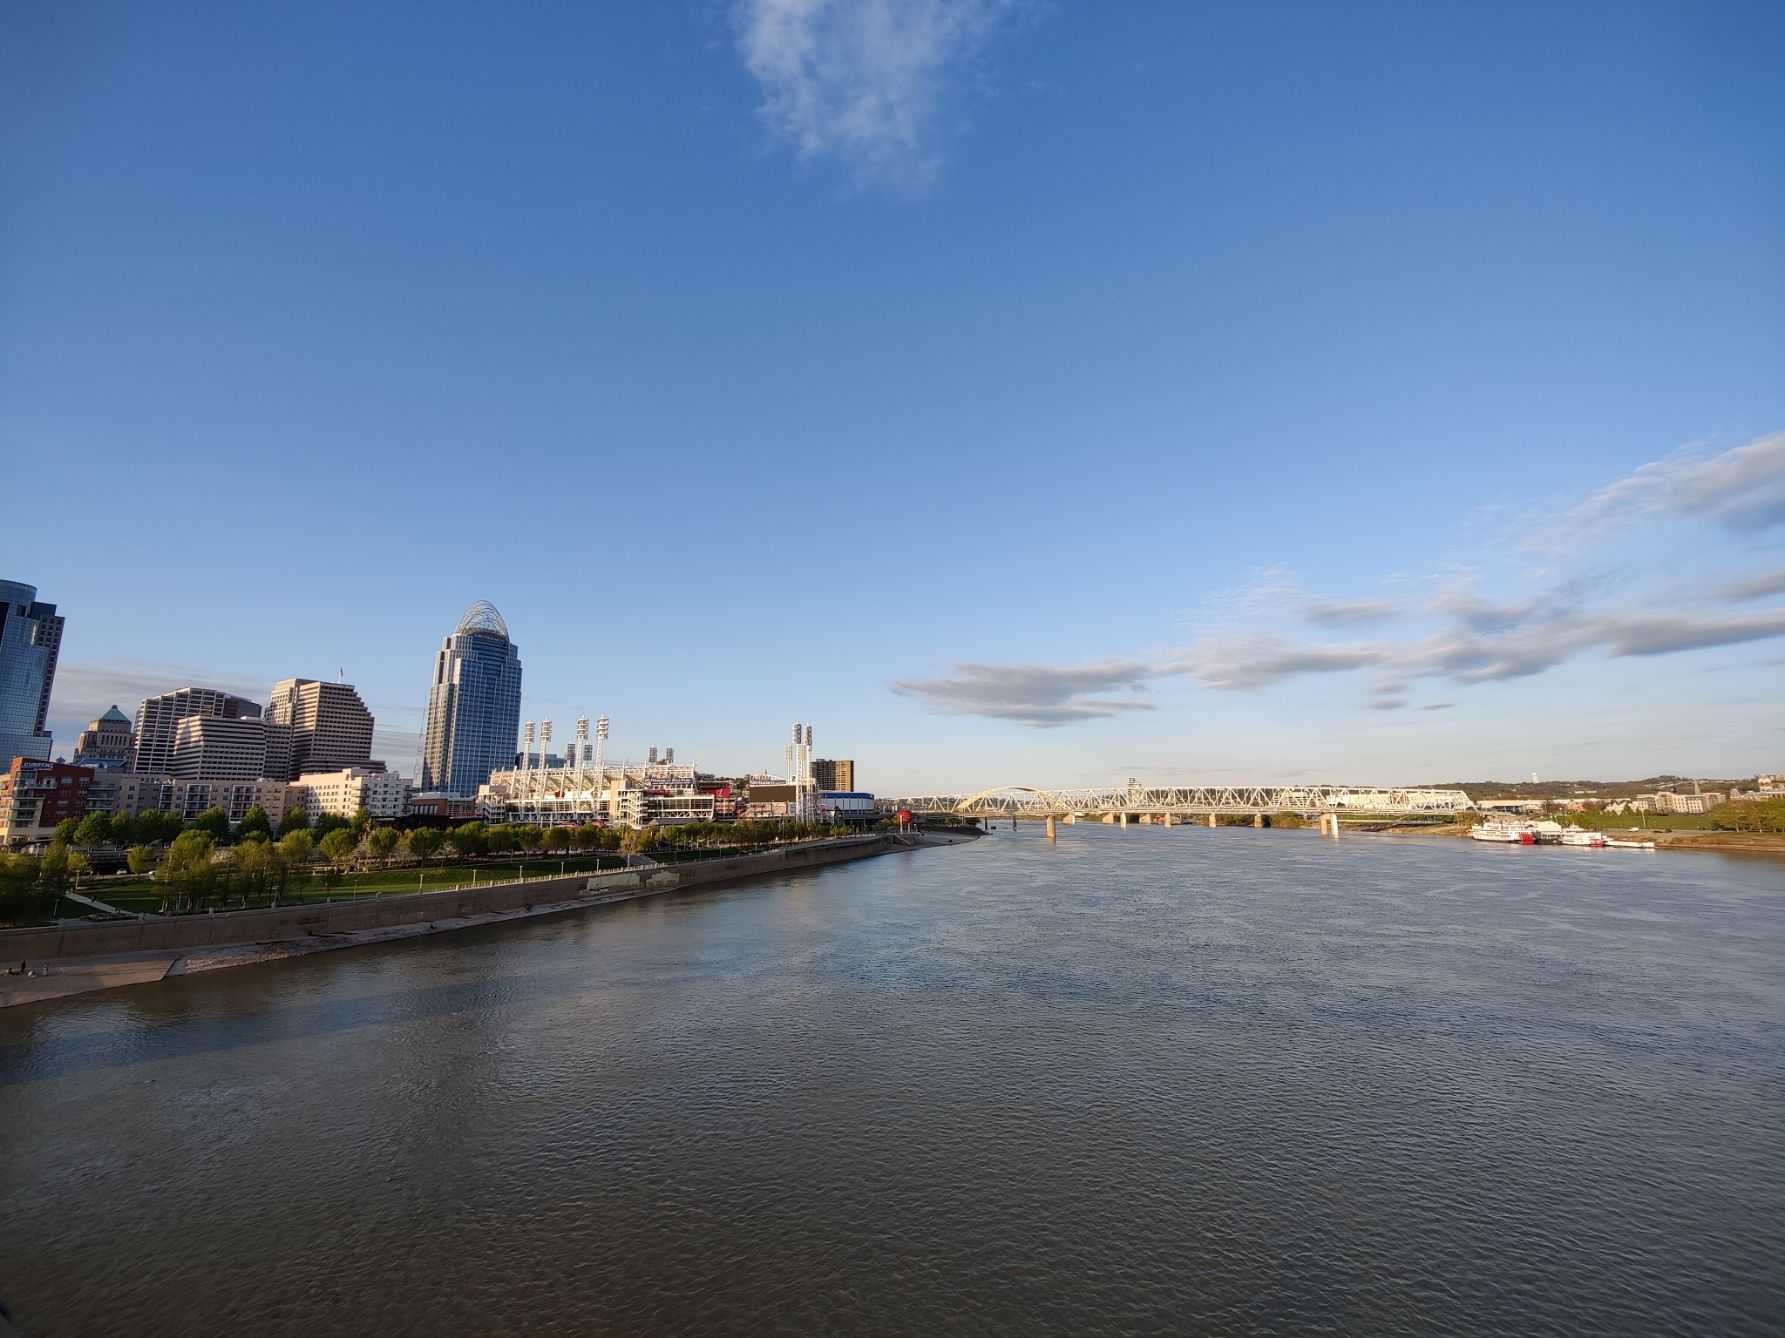 A view of Cincinnati over the river